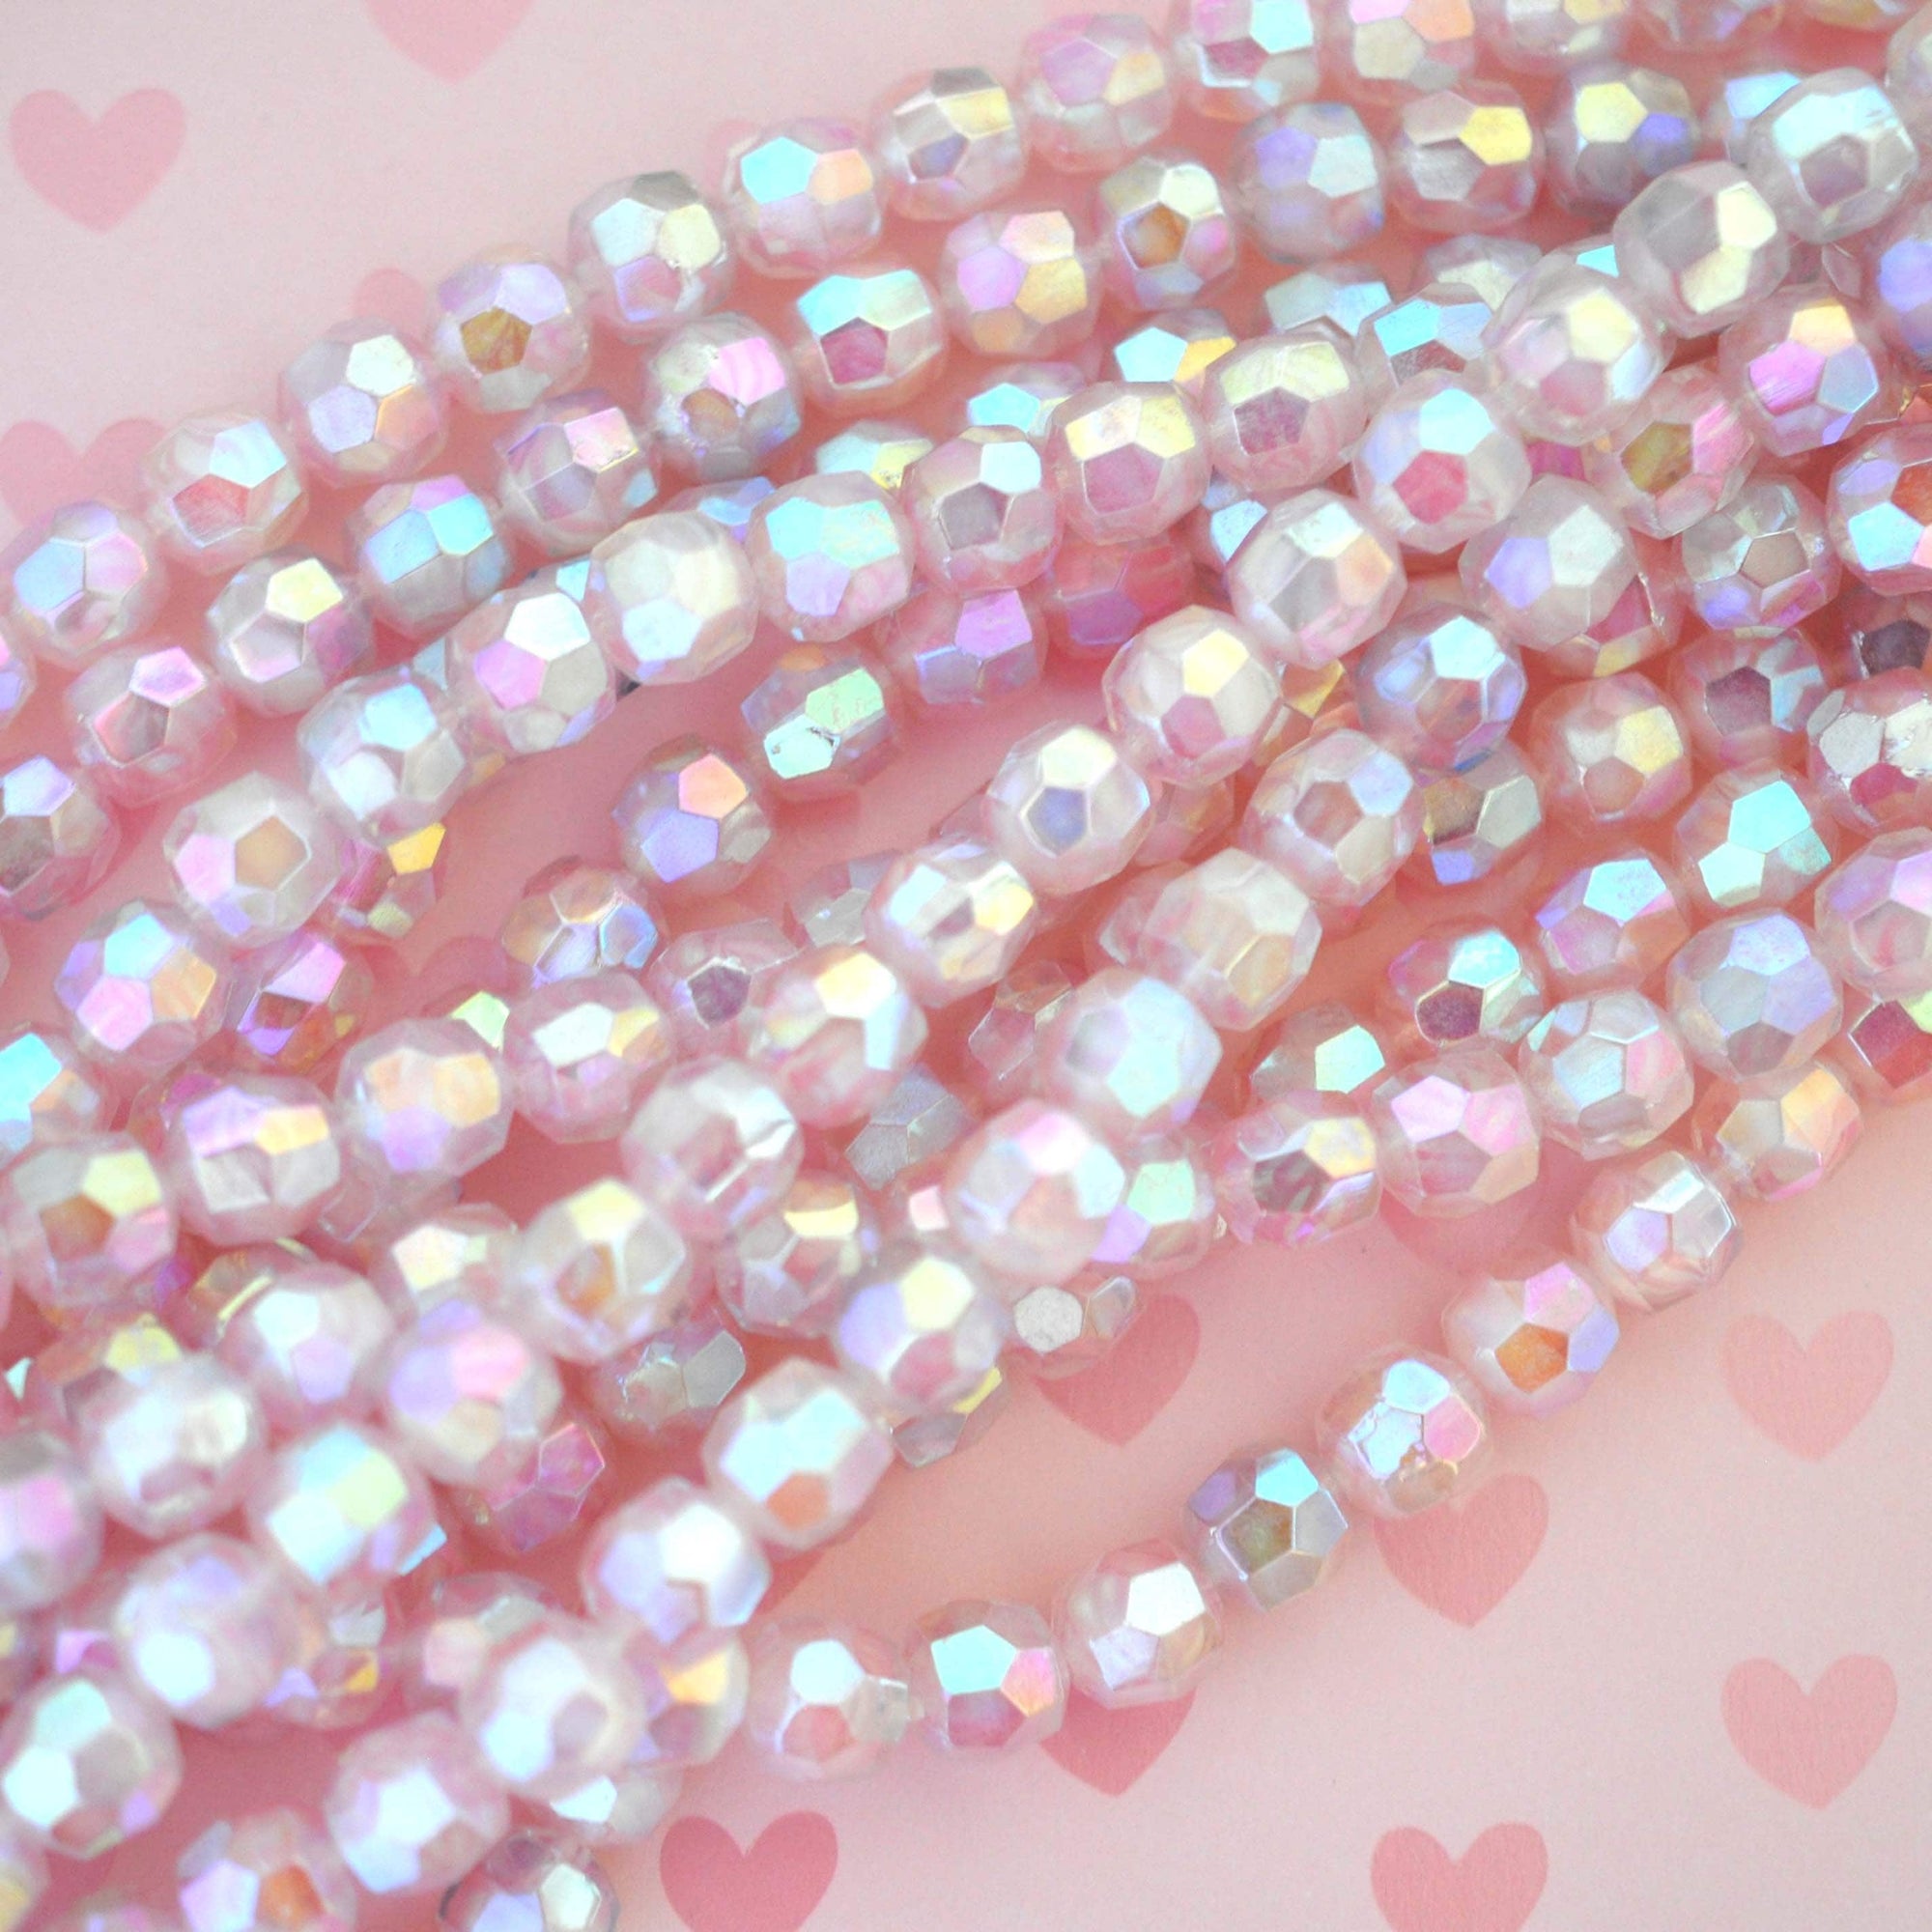 Sweetheart Pink 8MM Round Faceted Shimmer Swirl Vintage Glass Beads - 12 Beads